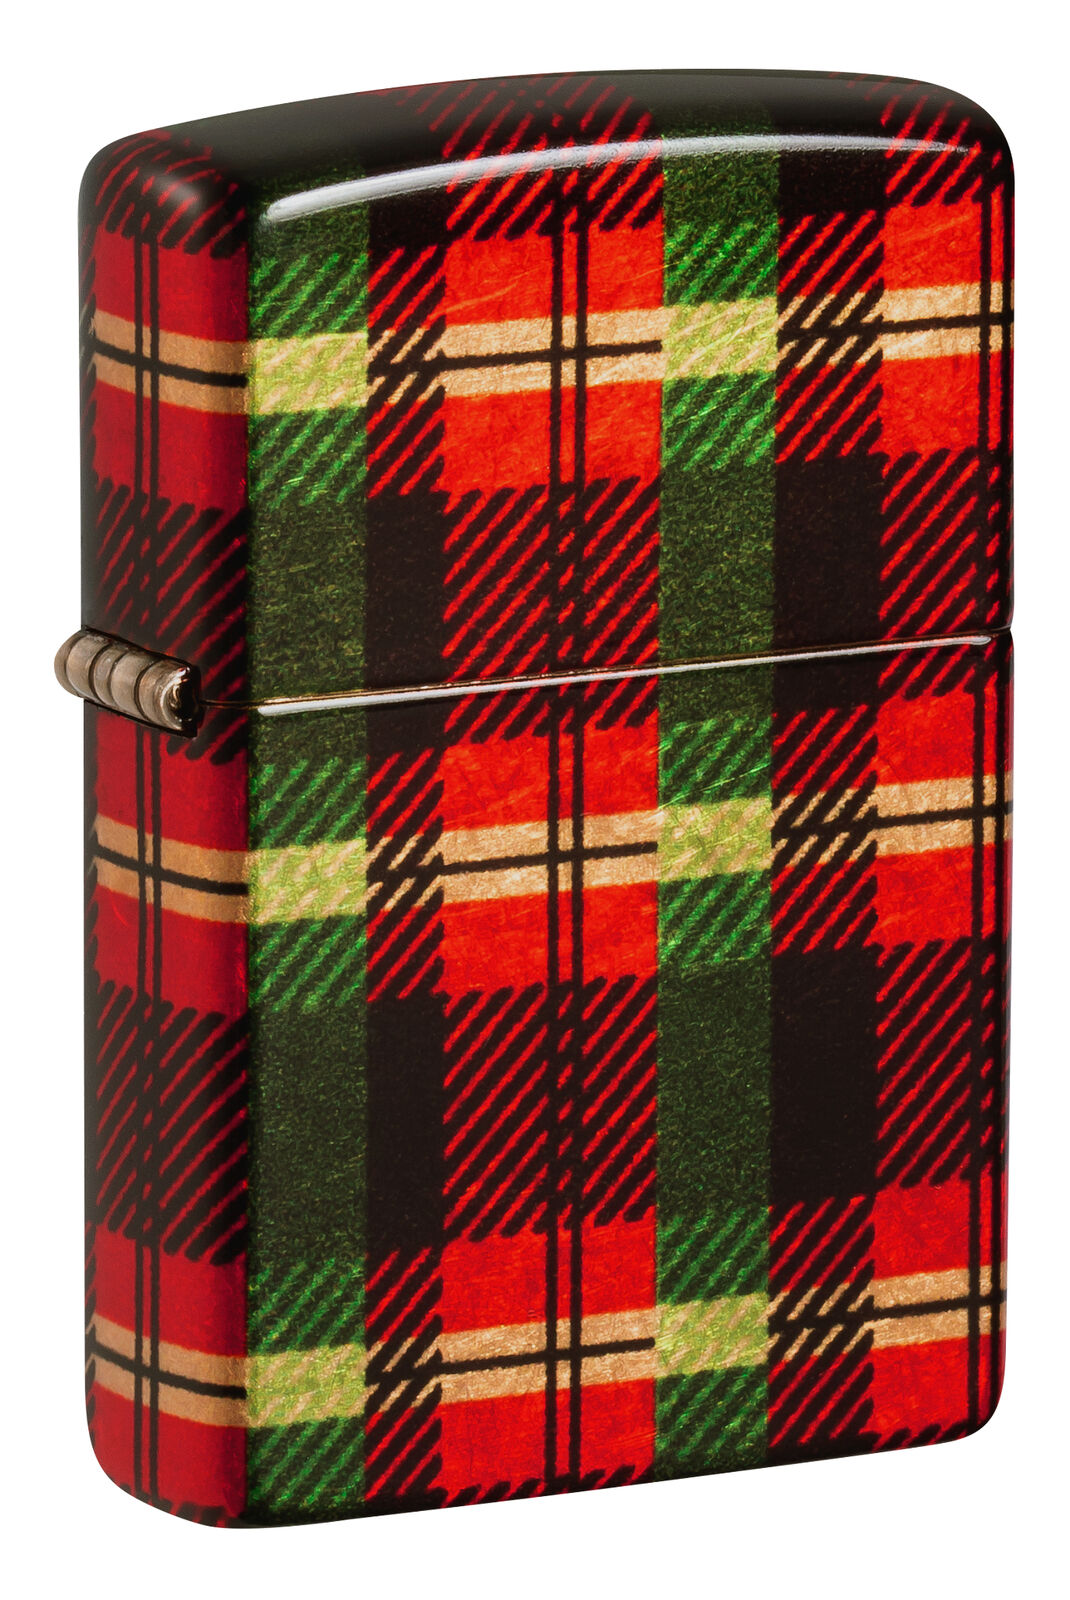 Zippo 'exclusive' Christmas Gold Plaid Design Windproof Lighter, 48458-110967